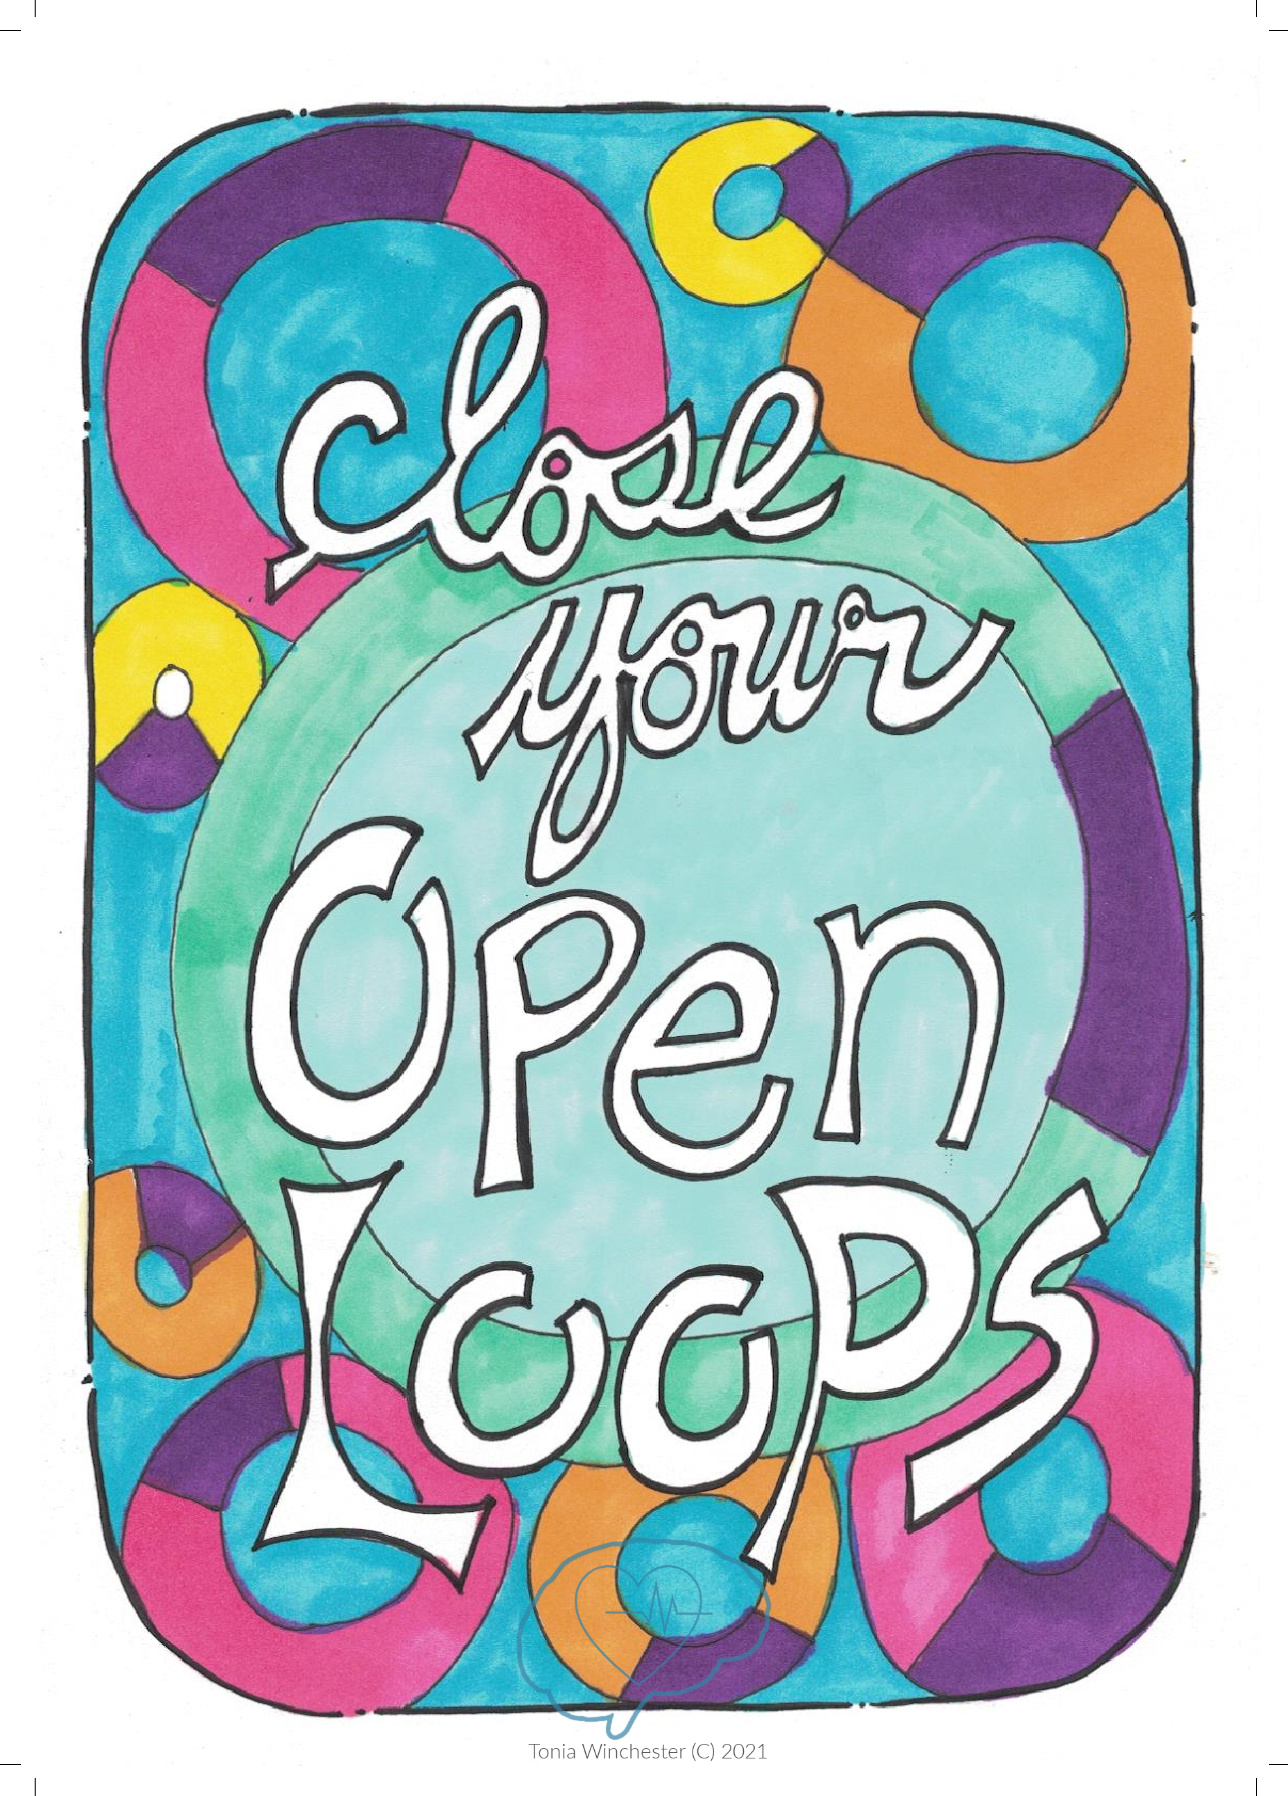 close your open loops